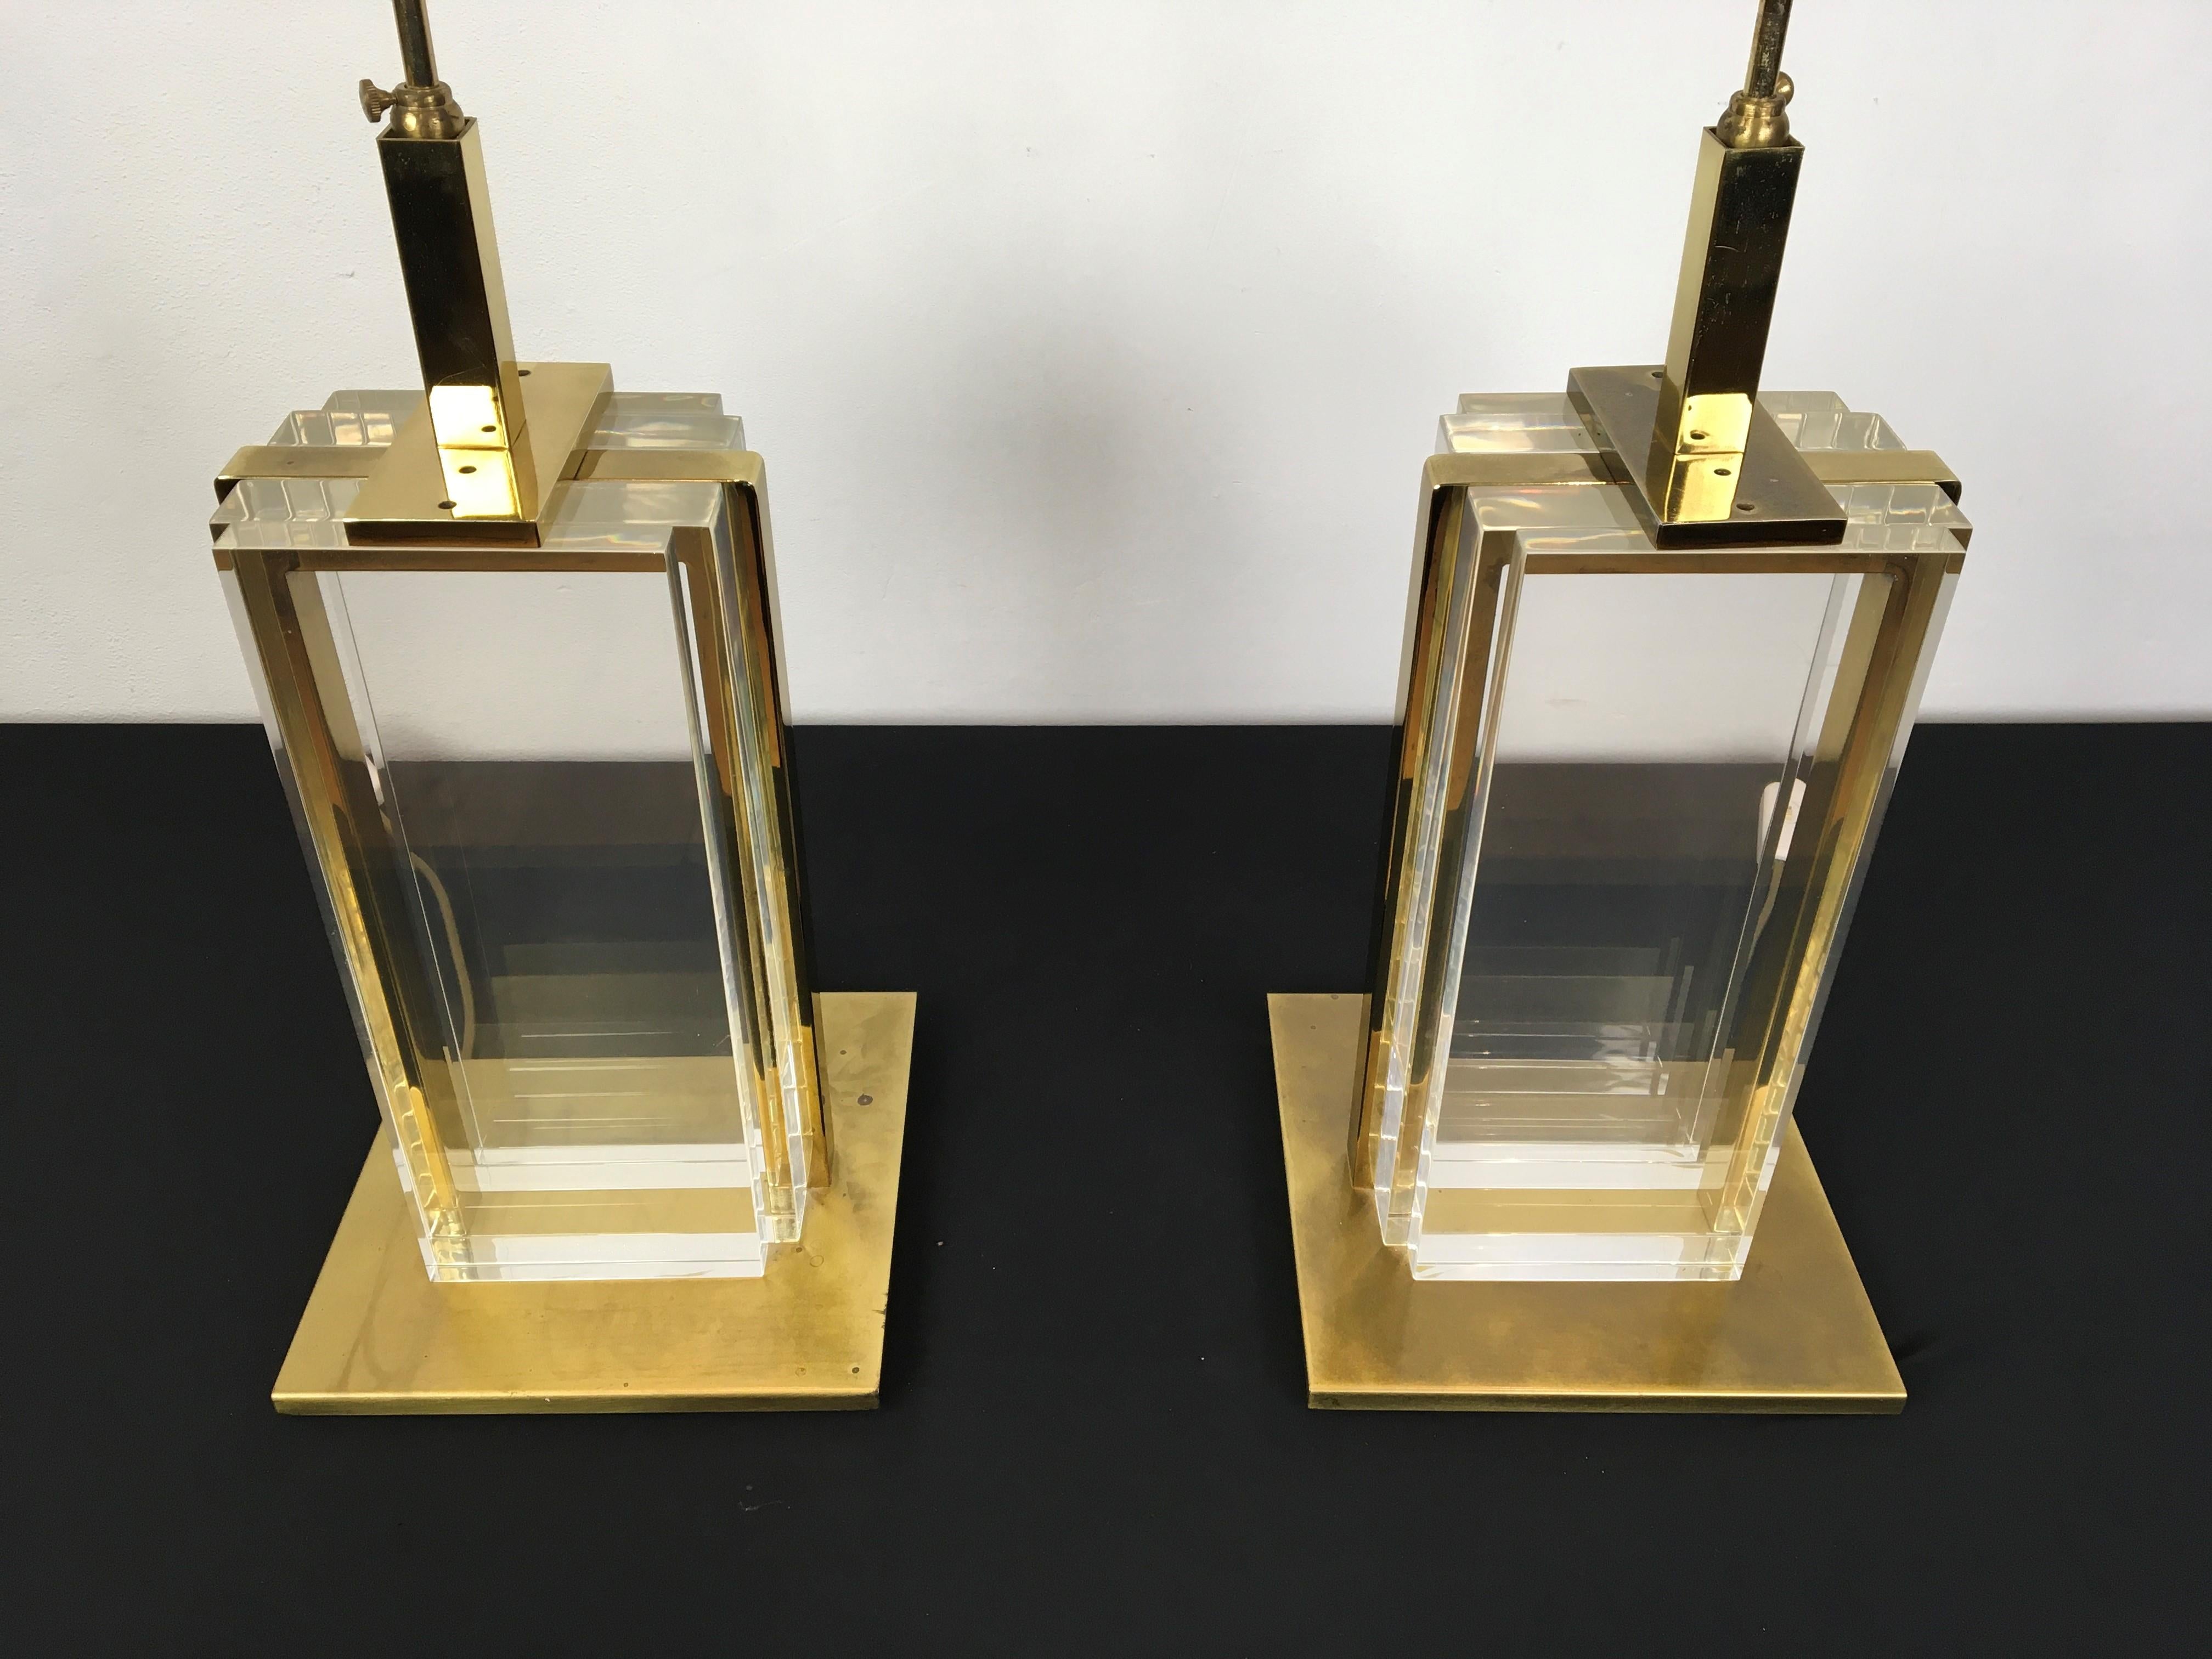 Pair of Belgo Chrome Table Lamps, Lucite and Brass, 1970s For Sale 4